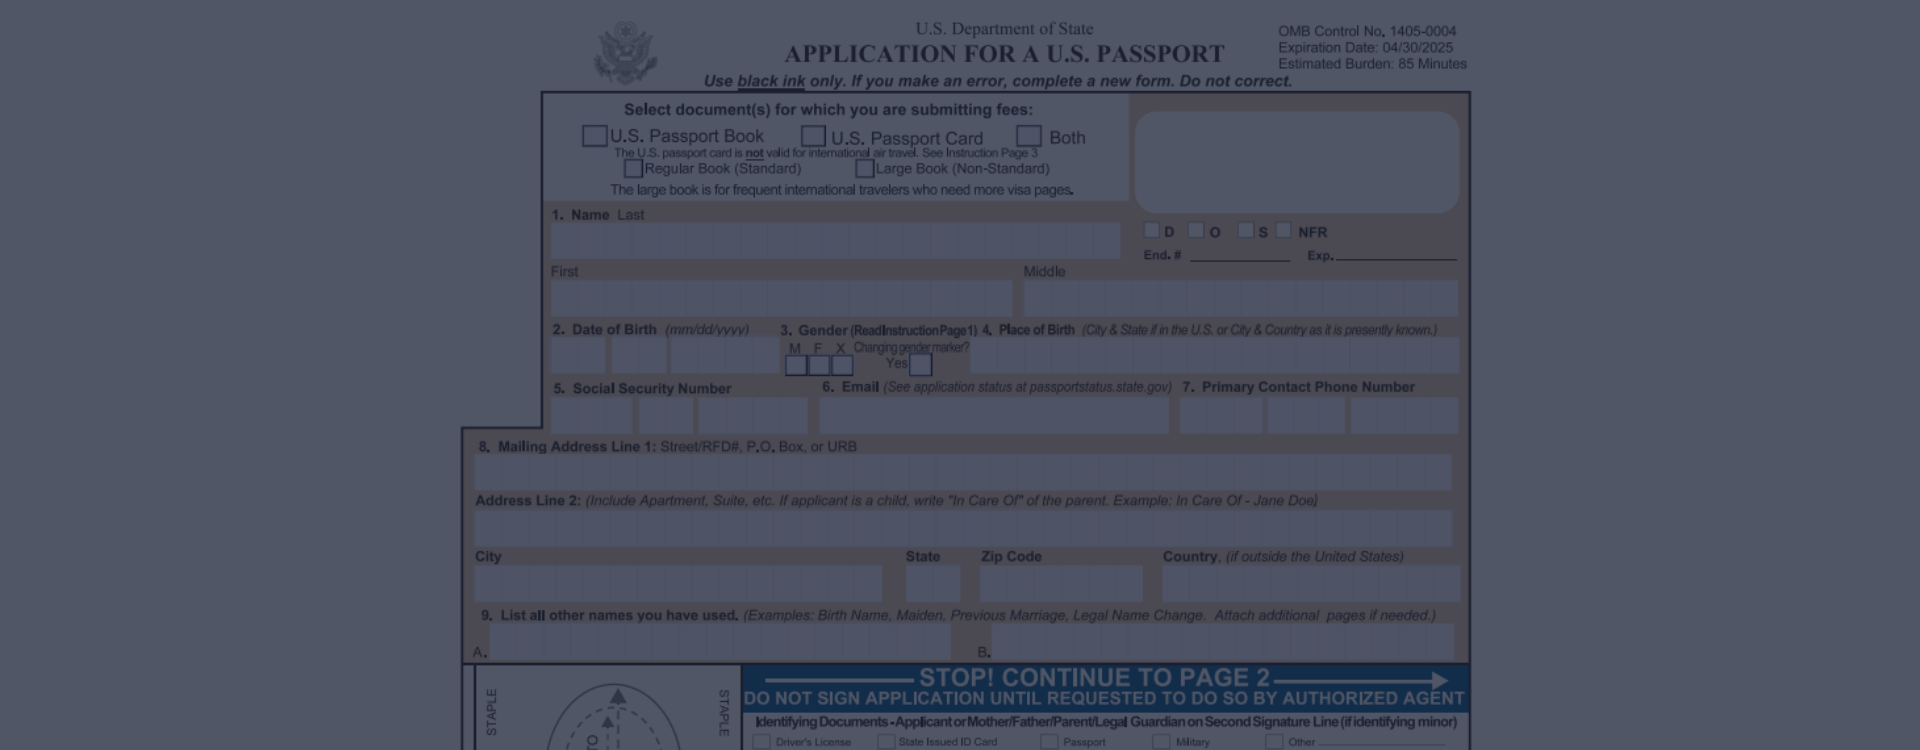 Ds 11 Us Passport Application ᐉ Ds 11 Fillable Form To Fill Online And Printable Pdf For Download 9138